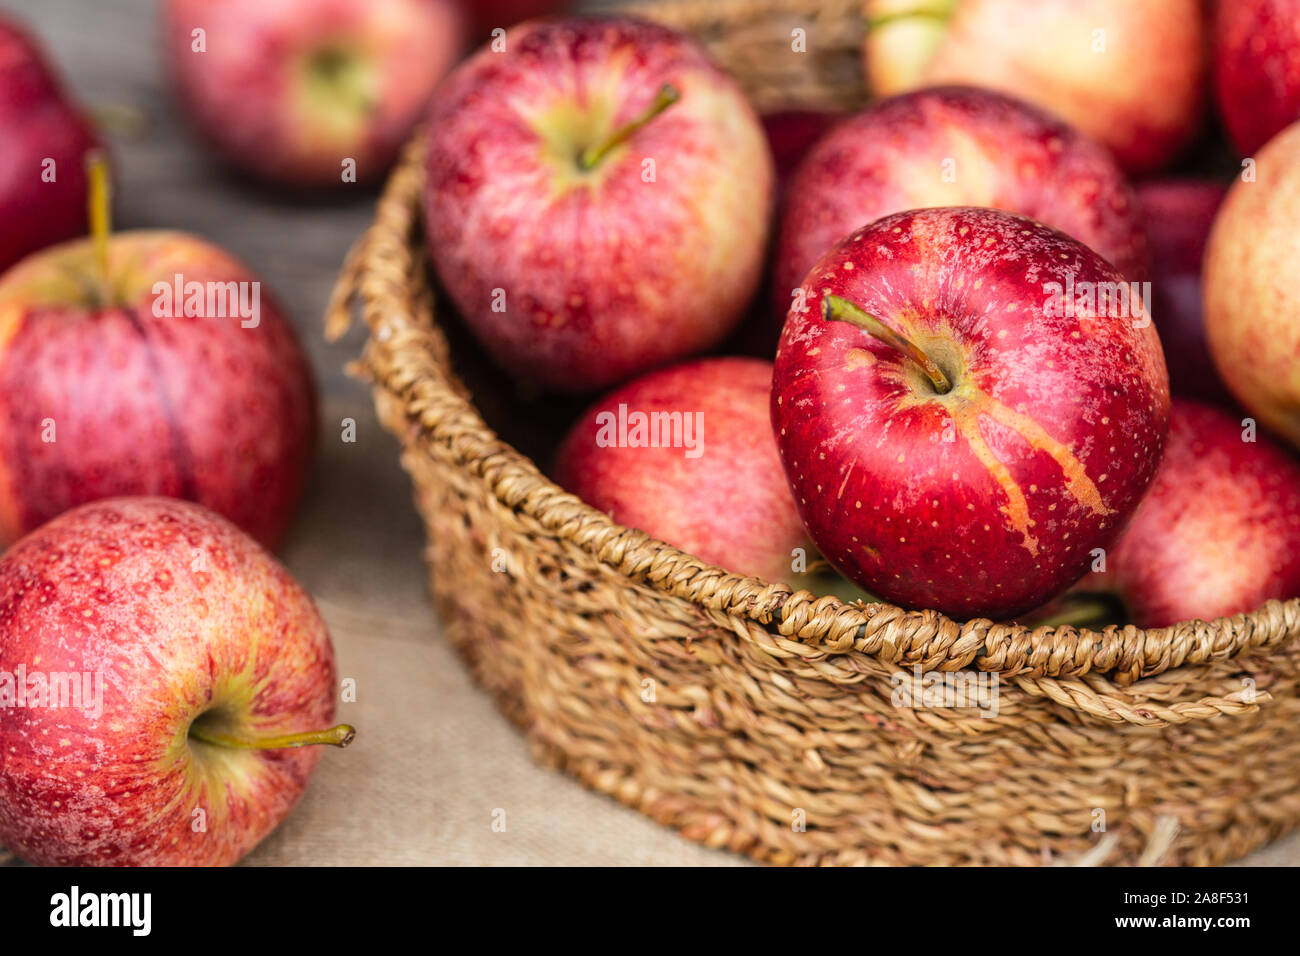 Red apples in a basket Stock Photo